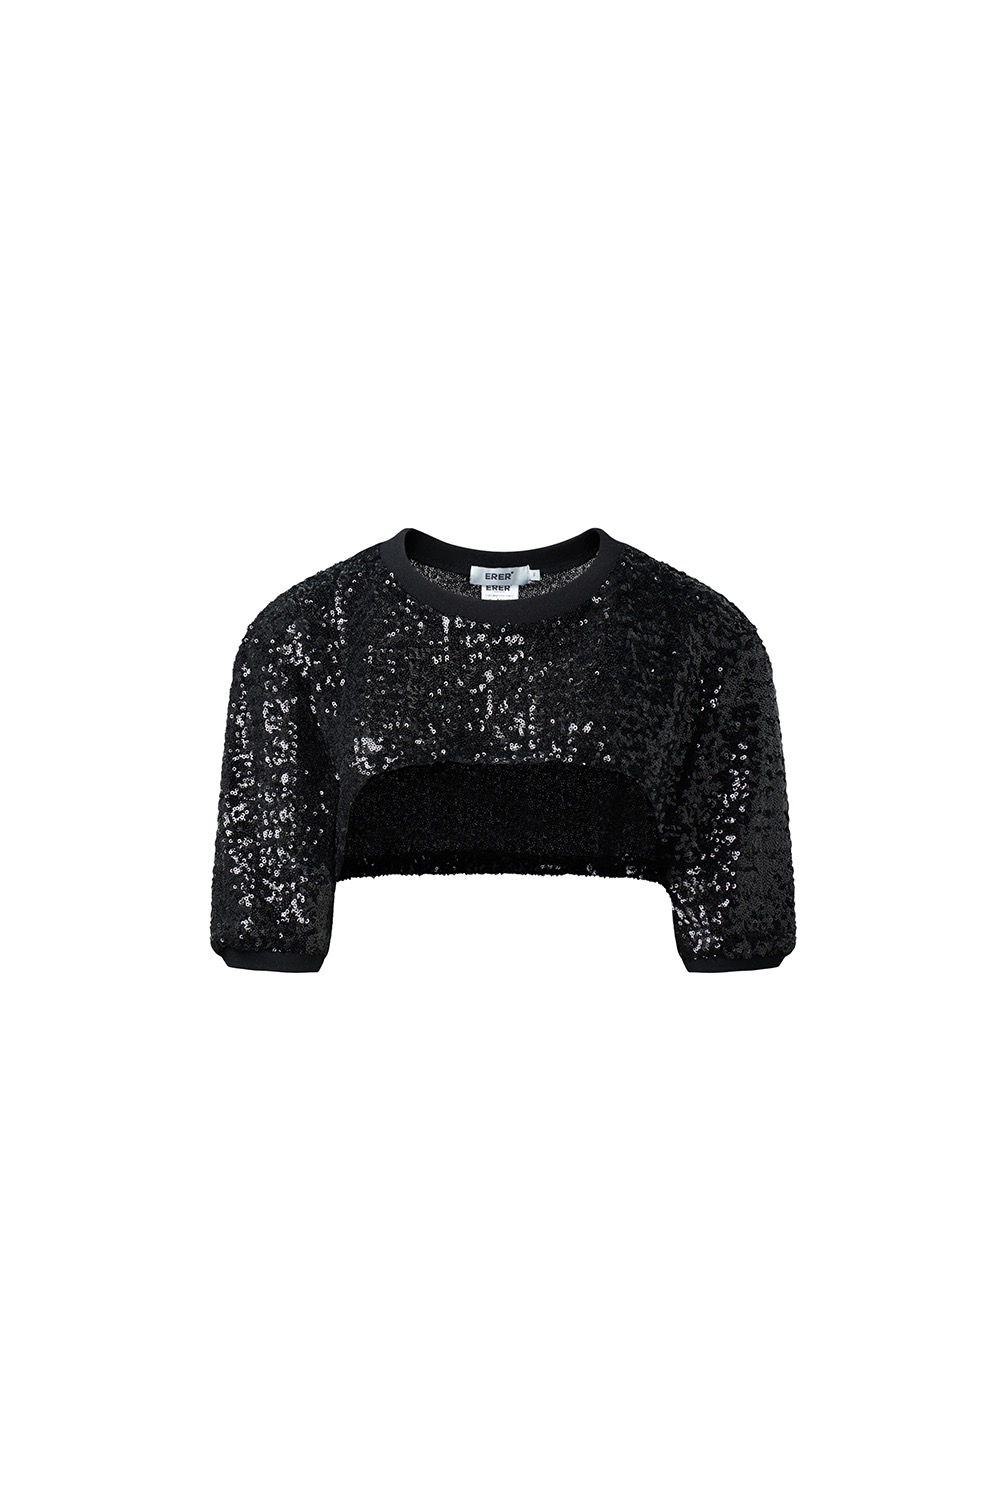 Sequin cropped t-shirt  - Black